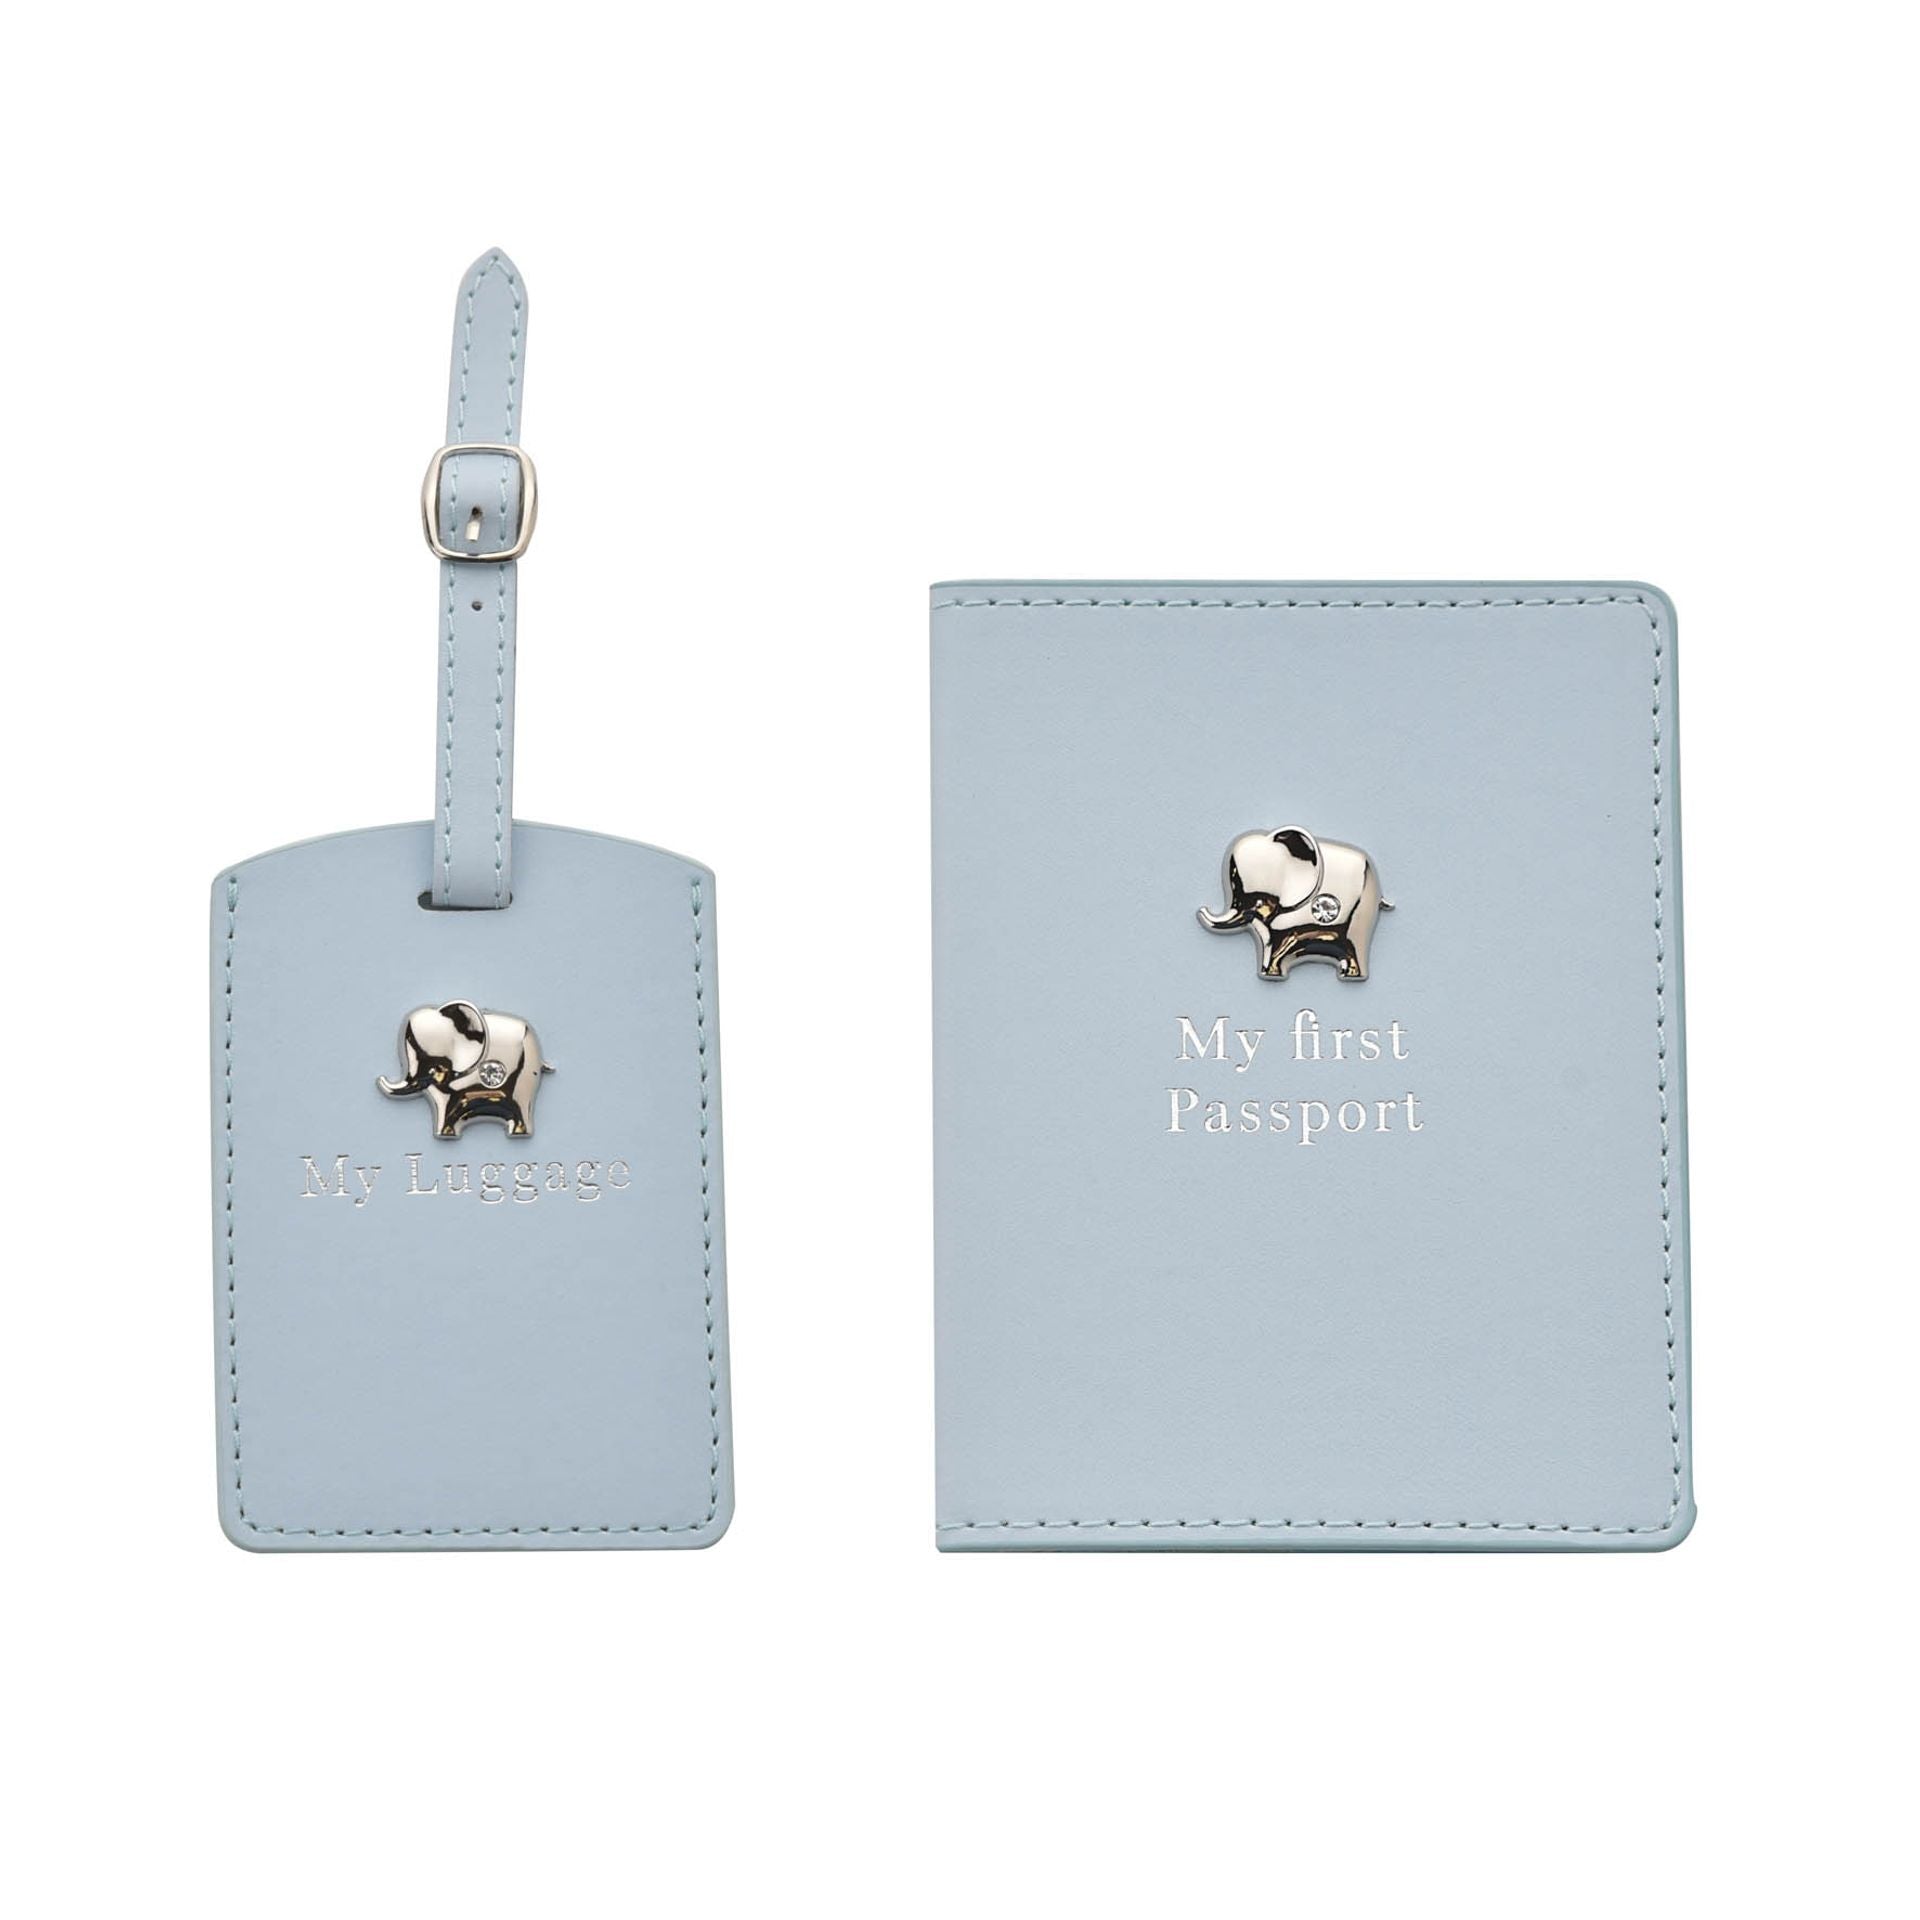 New Baby Boy Pink Passport Holder & Luggage Tag Set With Elephant Design